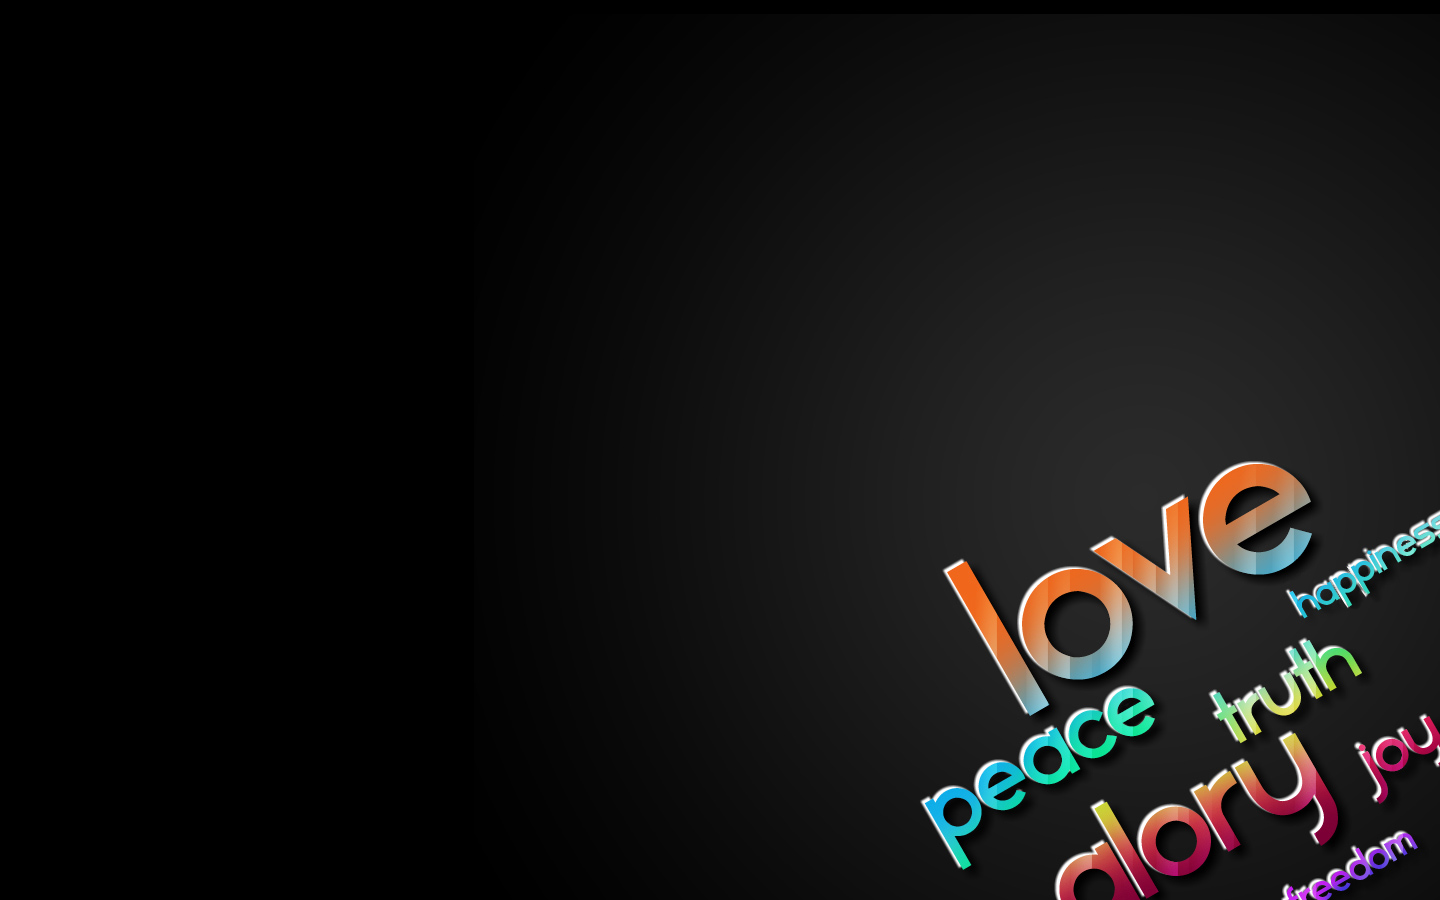 Love peace wallpaper wallpapers and backgrounds peace love